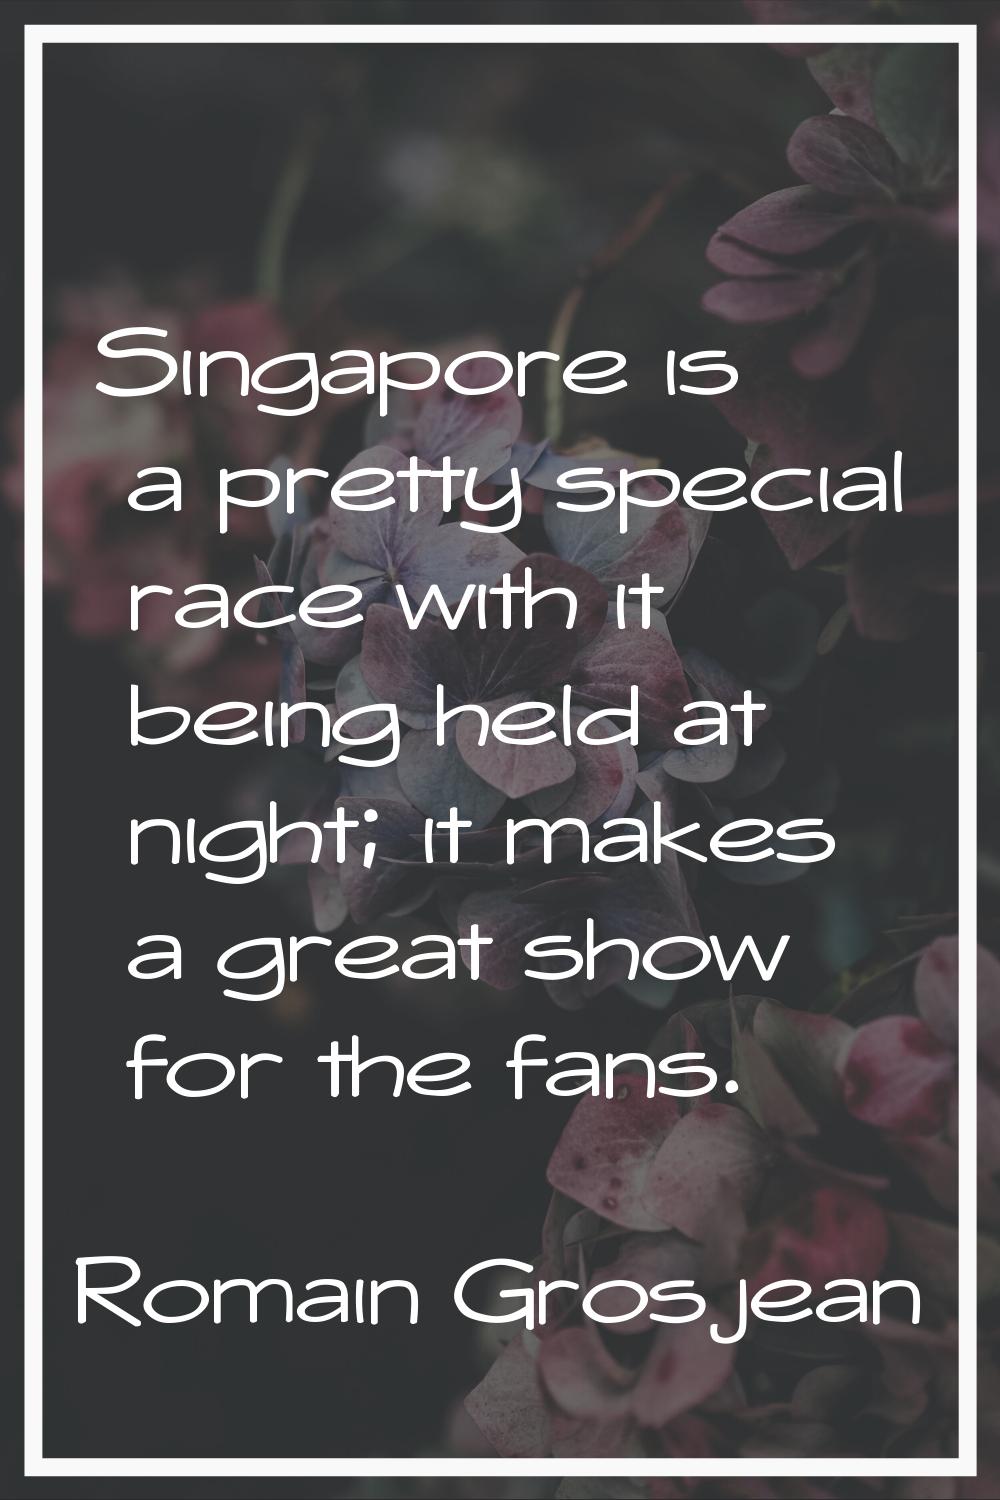 Singapore is a pretty special race with it being held at night; it makes a great show for the fans.